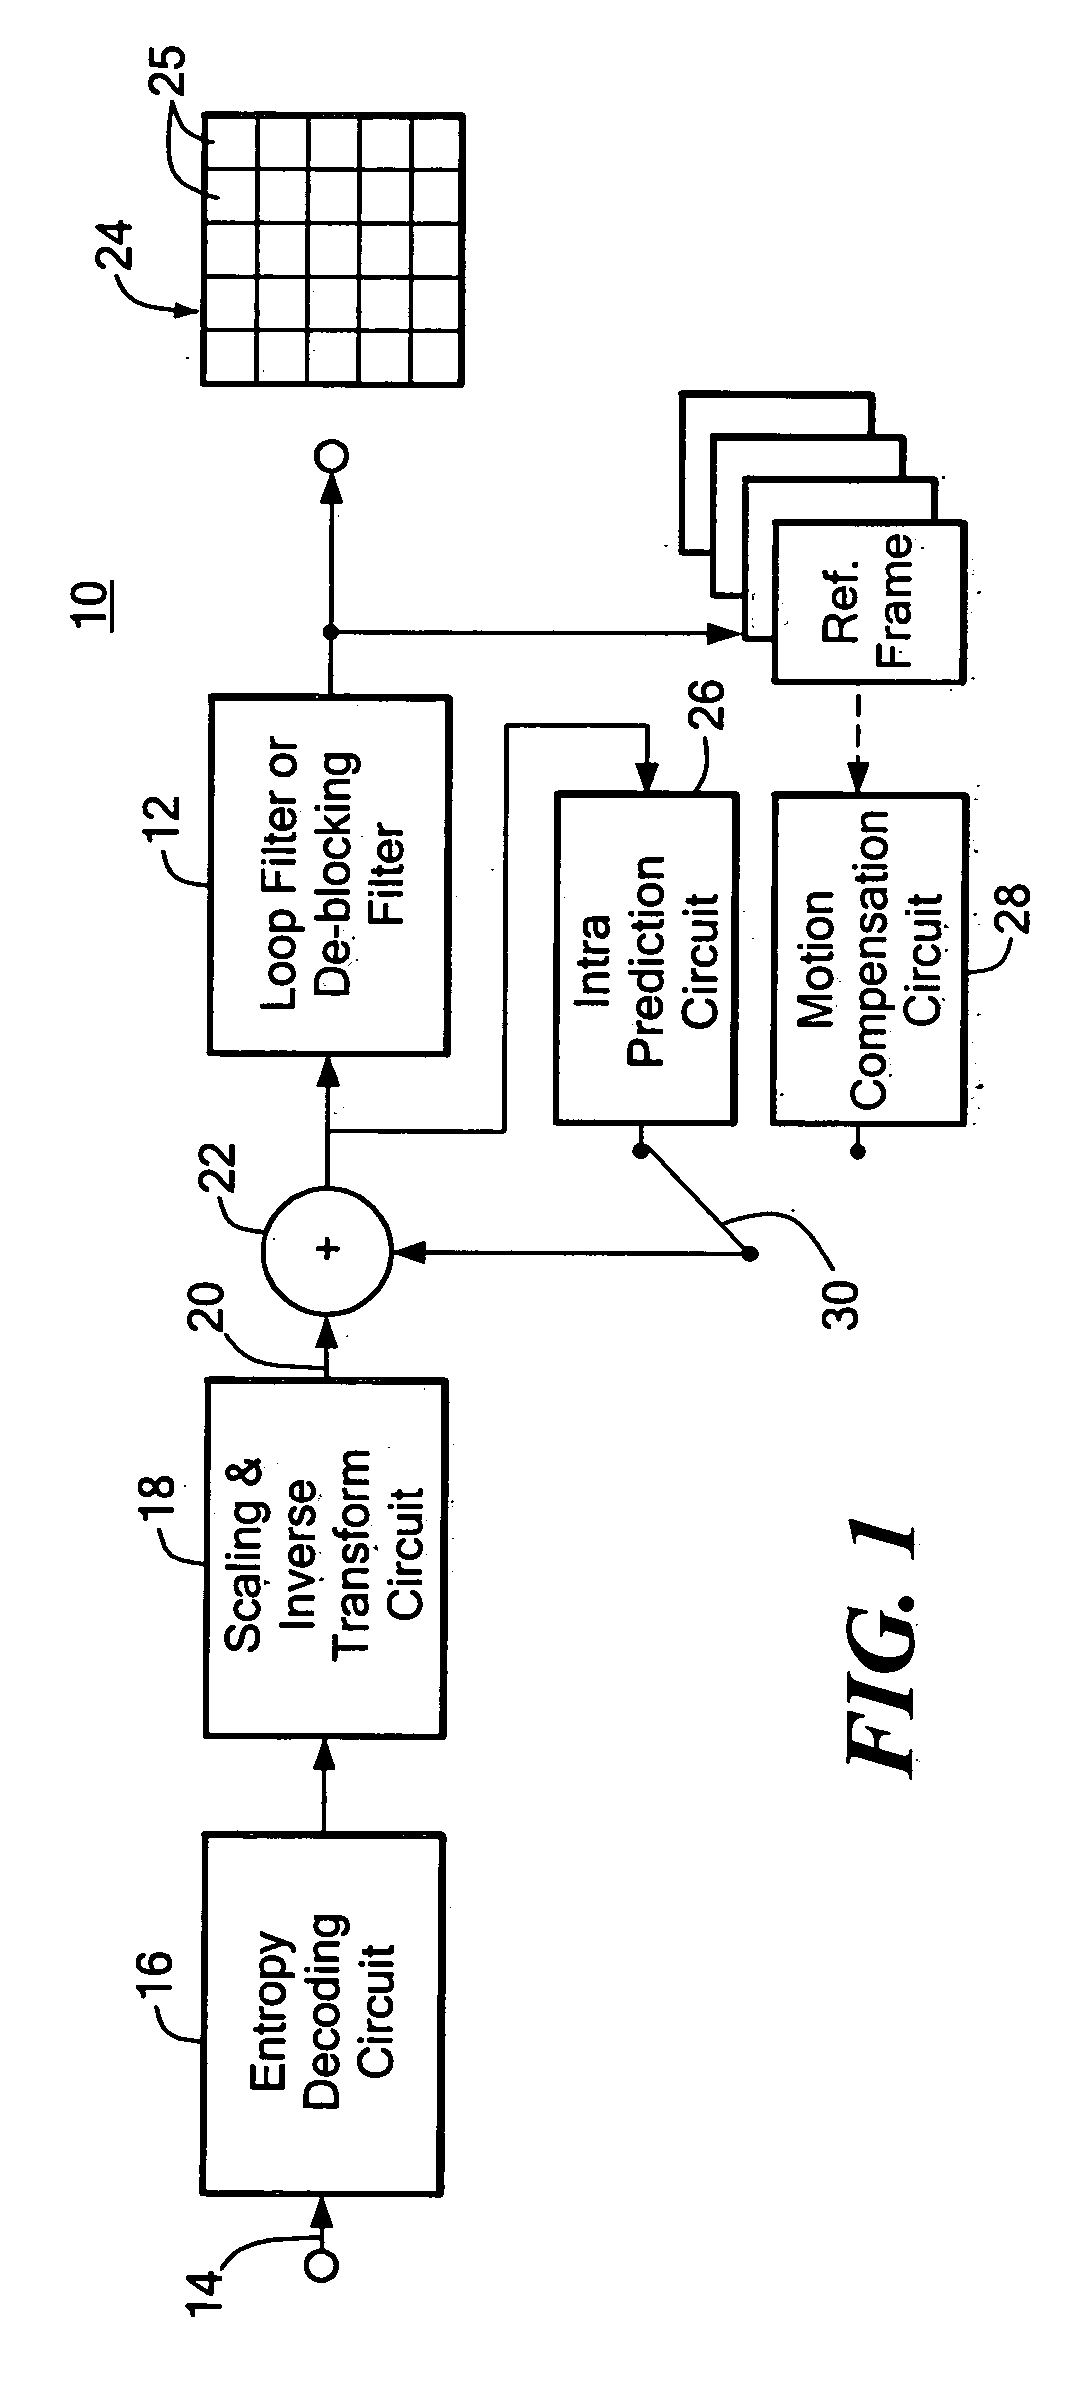 Method and apparatus for accelerating processing of a non-sequential instruction stream on a processor with multiple compute units